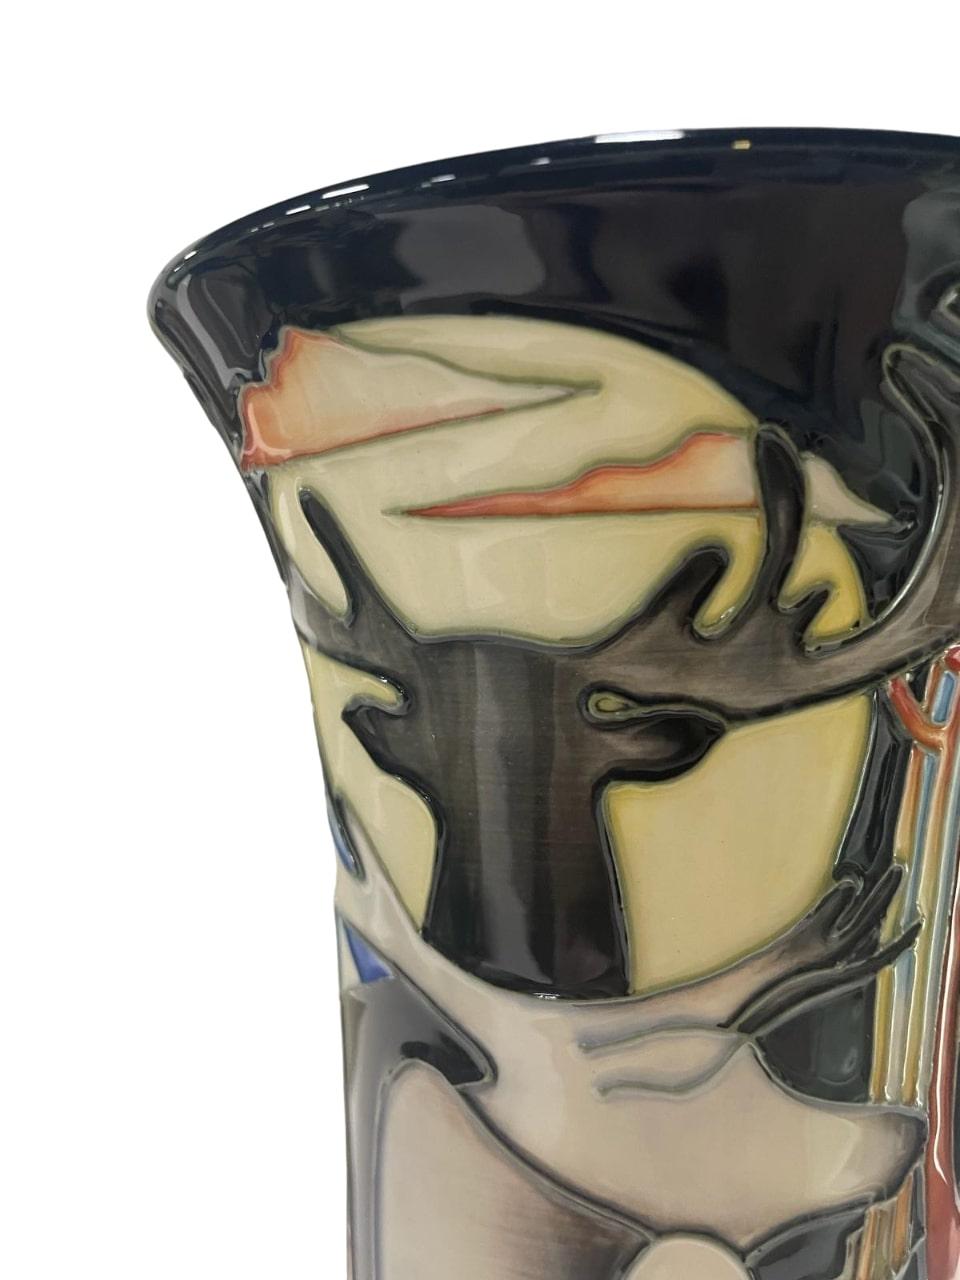 LIMITED EDITION MOORCROFT Wapiti vase by Emma Bossons dated 2012 31/35 For Sale 6